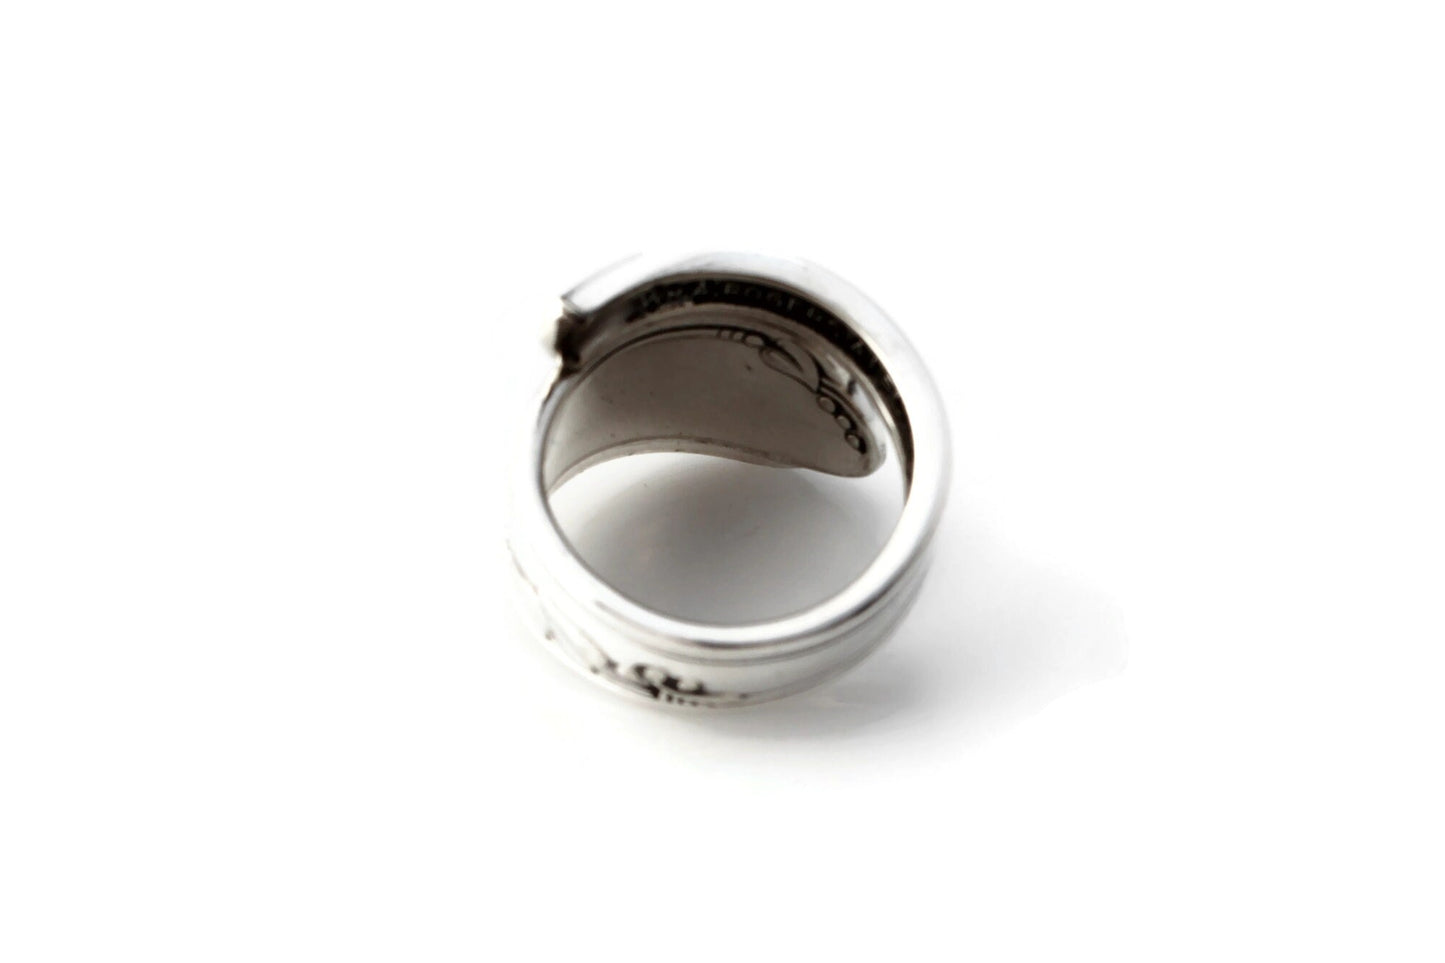 Art Deco Heather Spoon Ring Clean and smooth lines